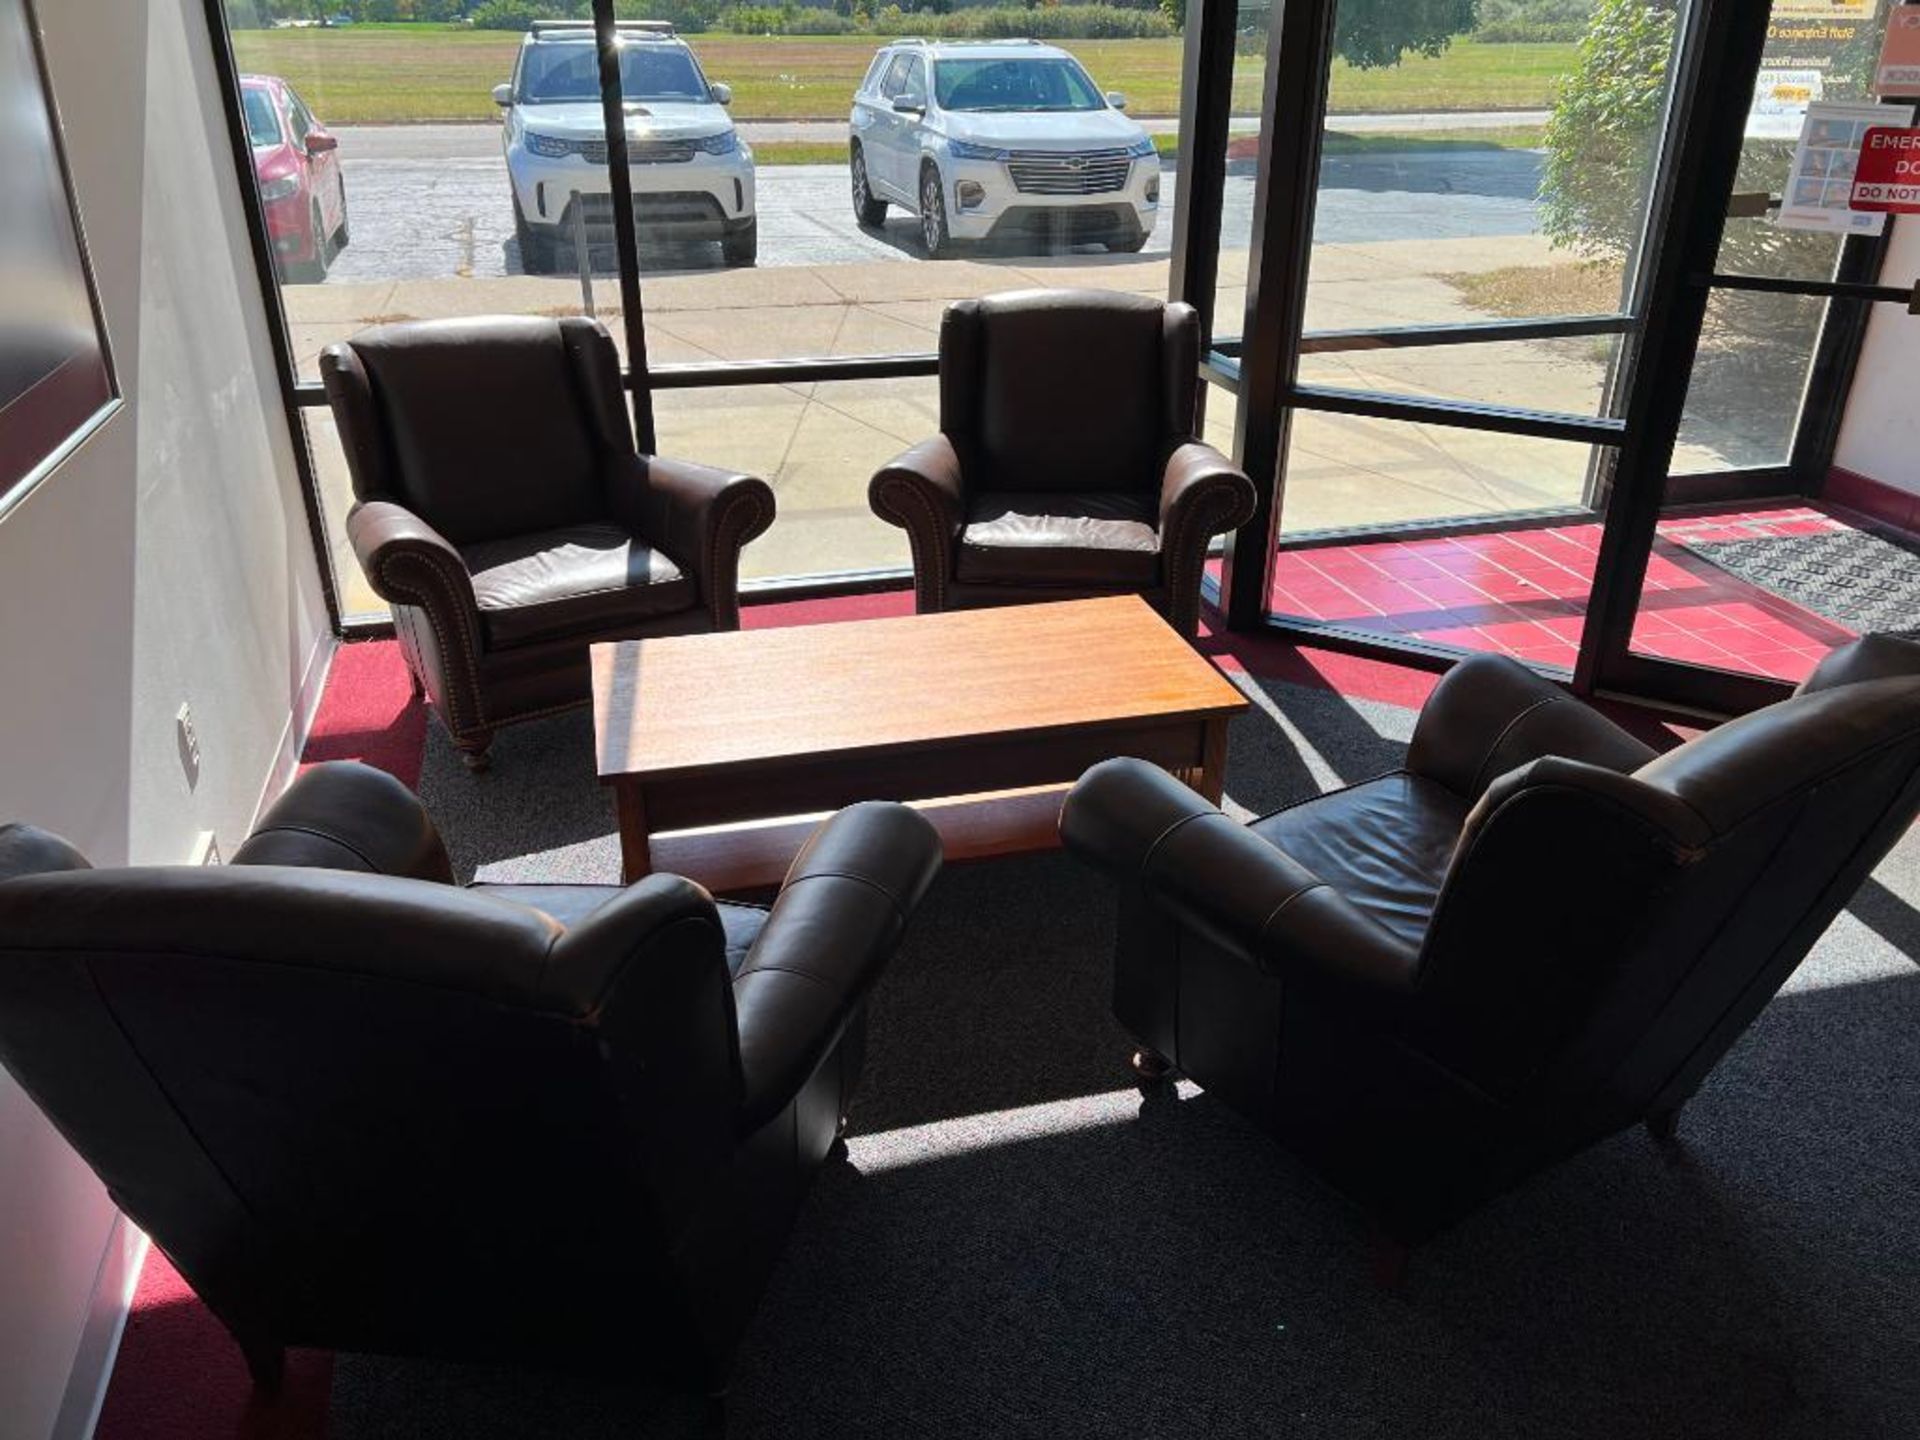 LOT: Contents of Lounge: (4) Lounge Chairs, (3) Wooden Tables